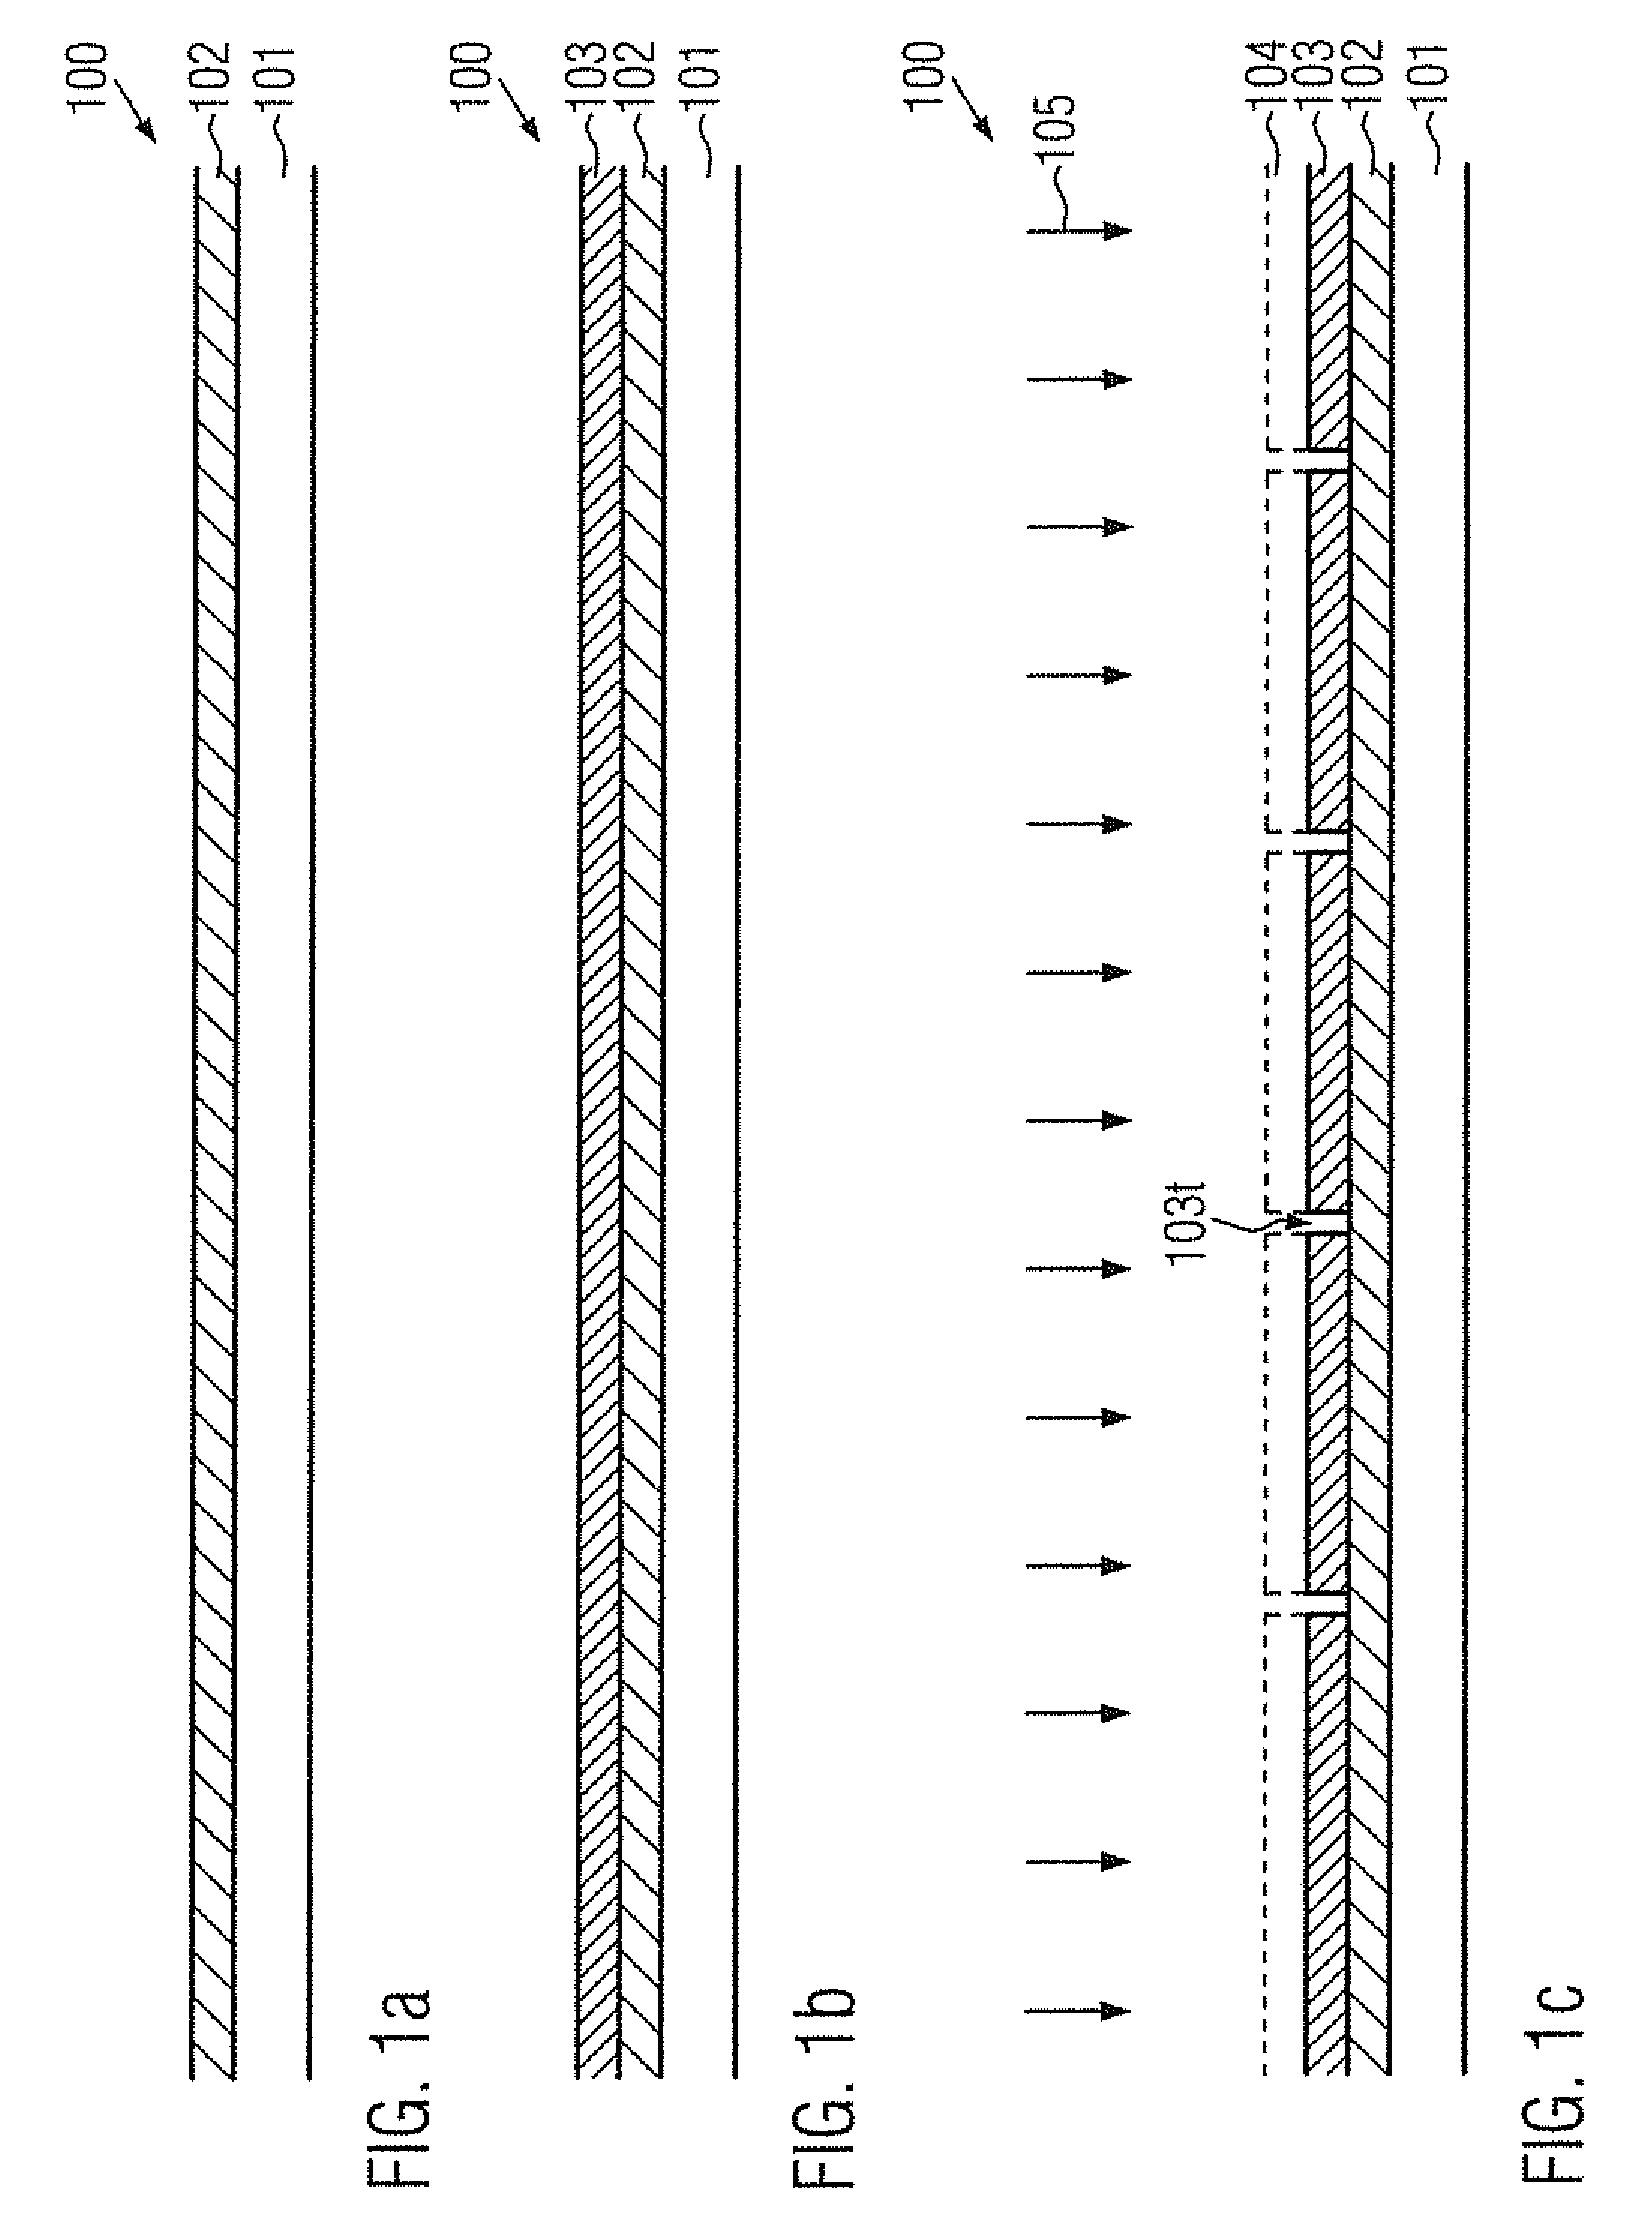 Thin film solar cell module including series-connected cells formed on a flexible substrate by using lithography